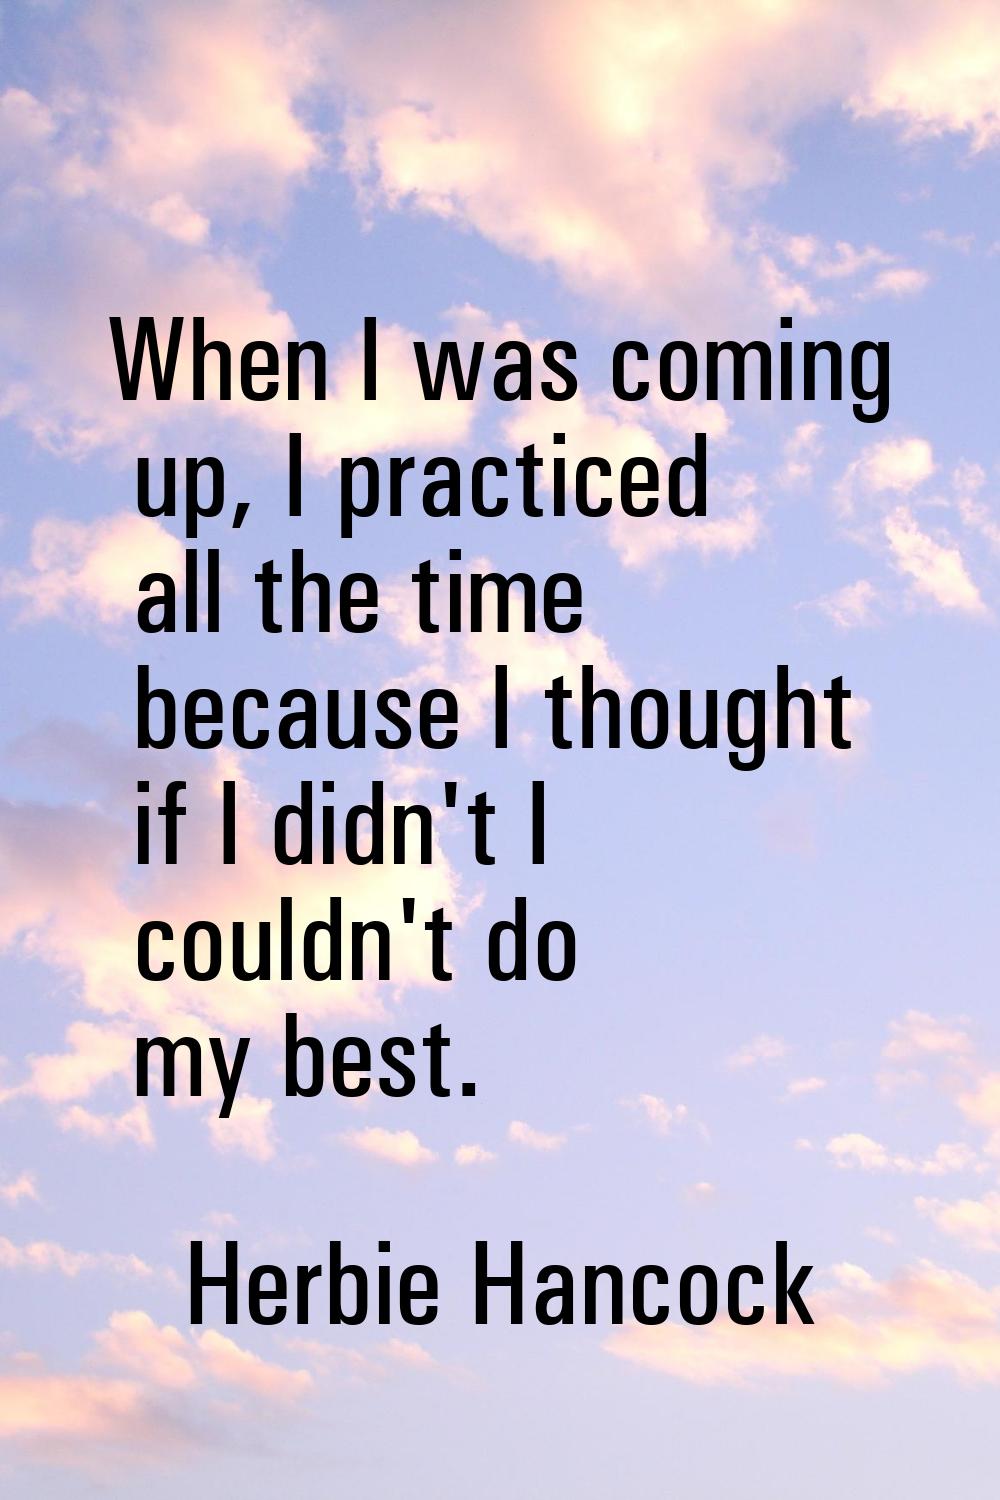 When I was coming up, I practiced all the time because I thought if I didn't I couldn't do my best.